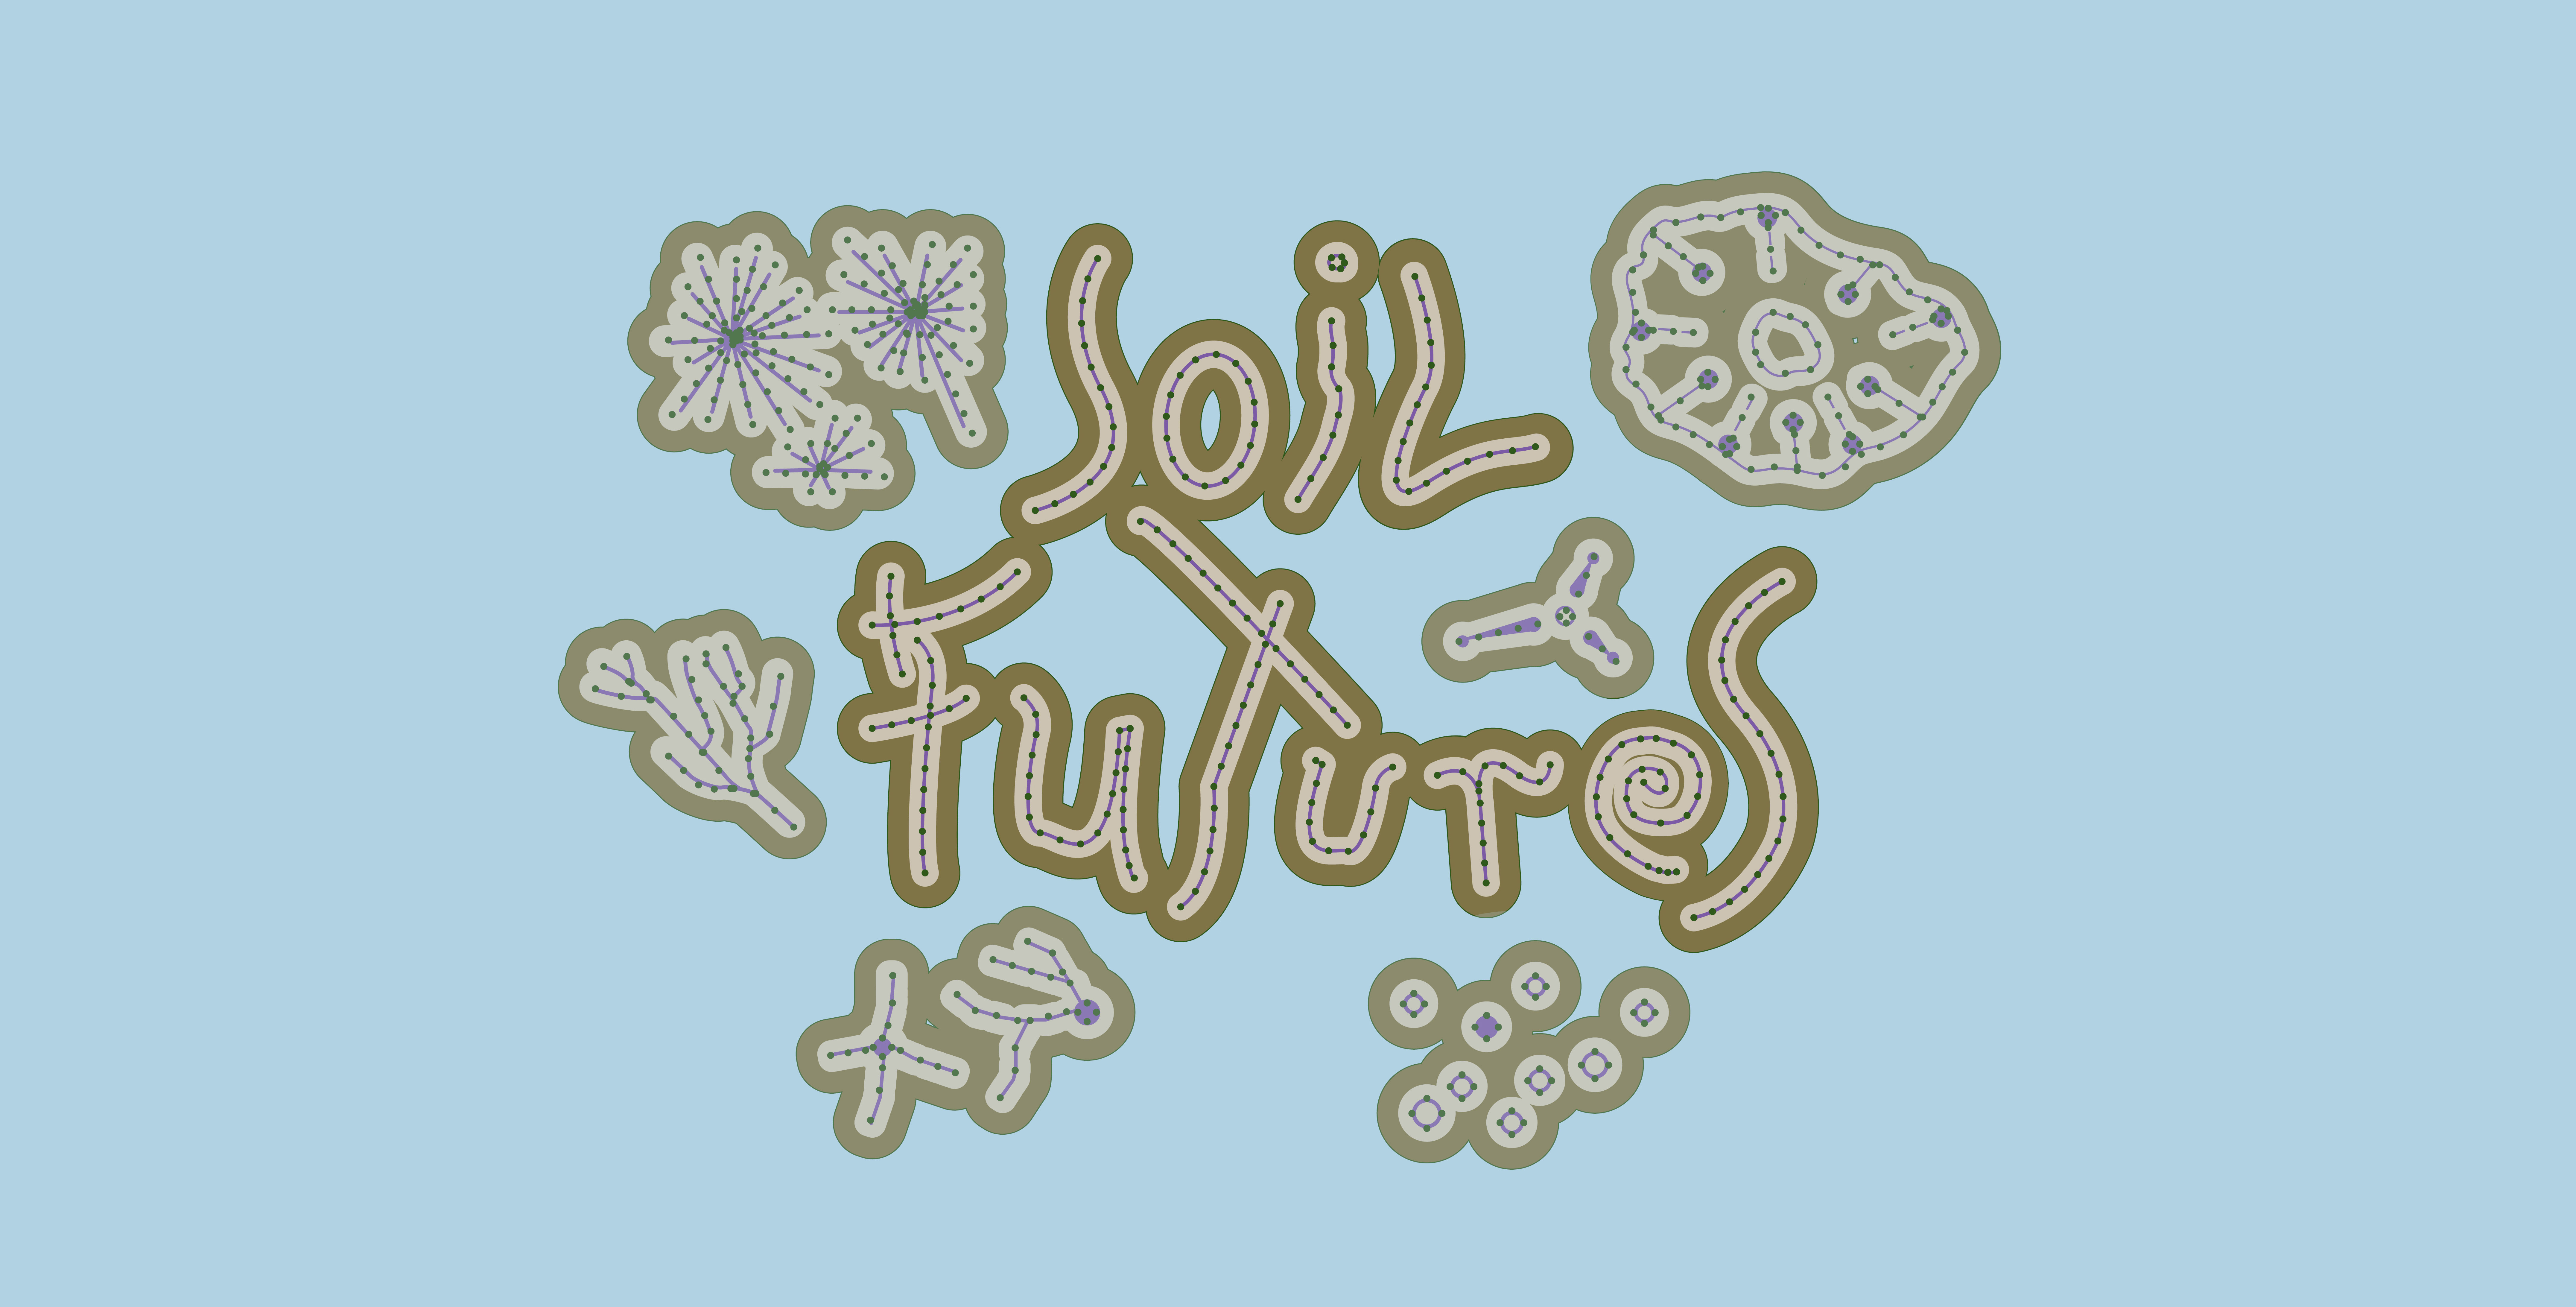 <a href="https://www.artscatalyst.org/soil-futures">Soil Futures Residency Exchange: Opportunity for Artists  </a>